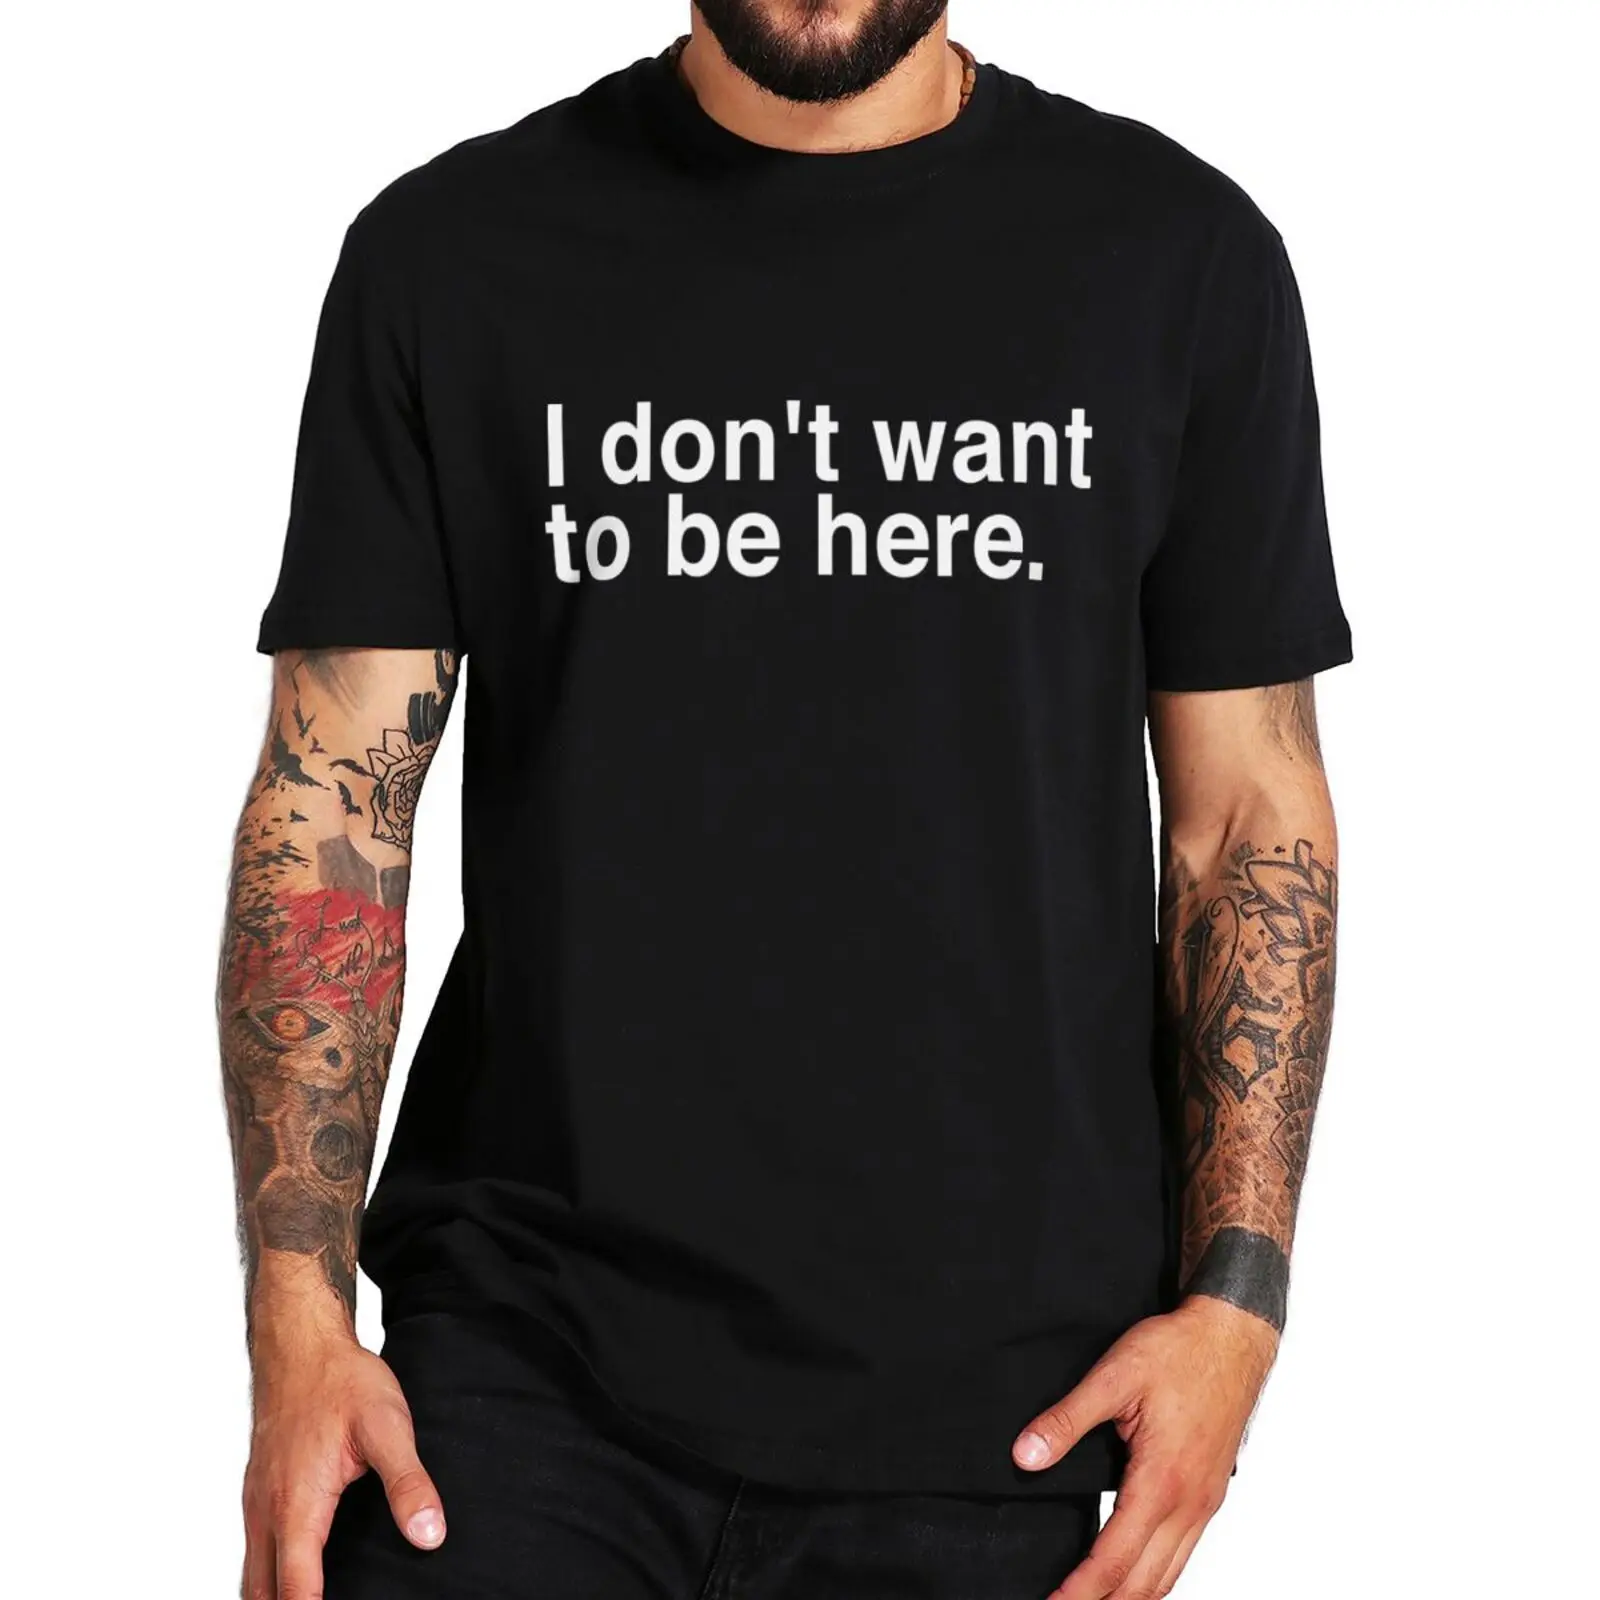 

I Don't Want To Be Here T Shirt Funny Sayings Humor Jokes Geek Gift Tee Tops 100% Cotton Unisex Soft Casual T-shirt EU Size